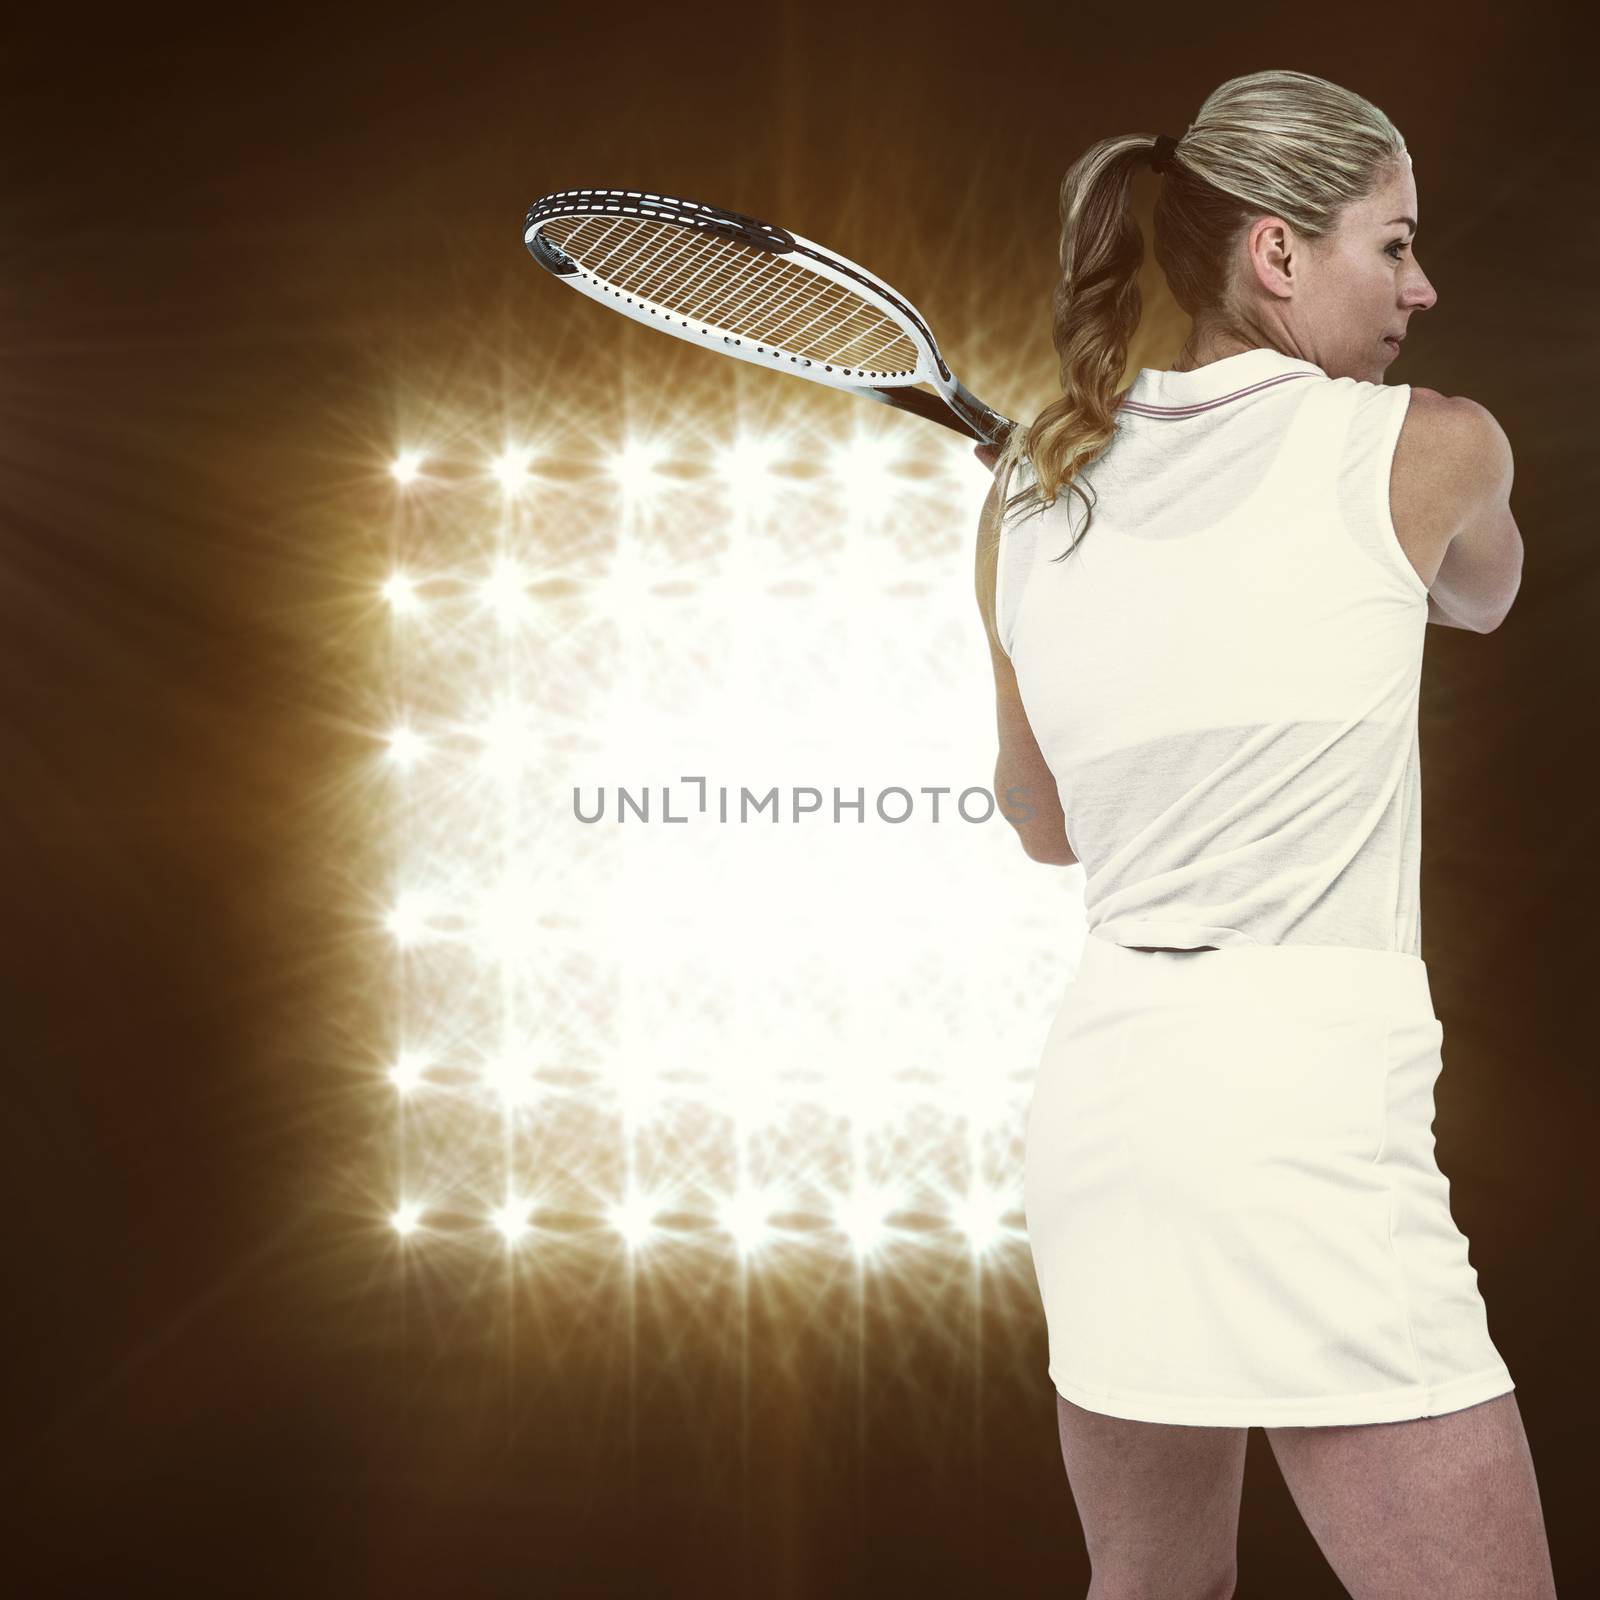 Athlete playing tennis with a racket  against spotlight